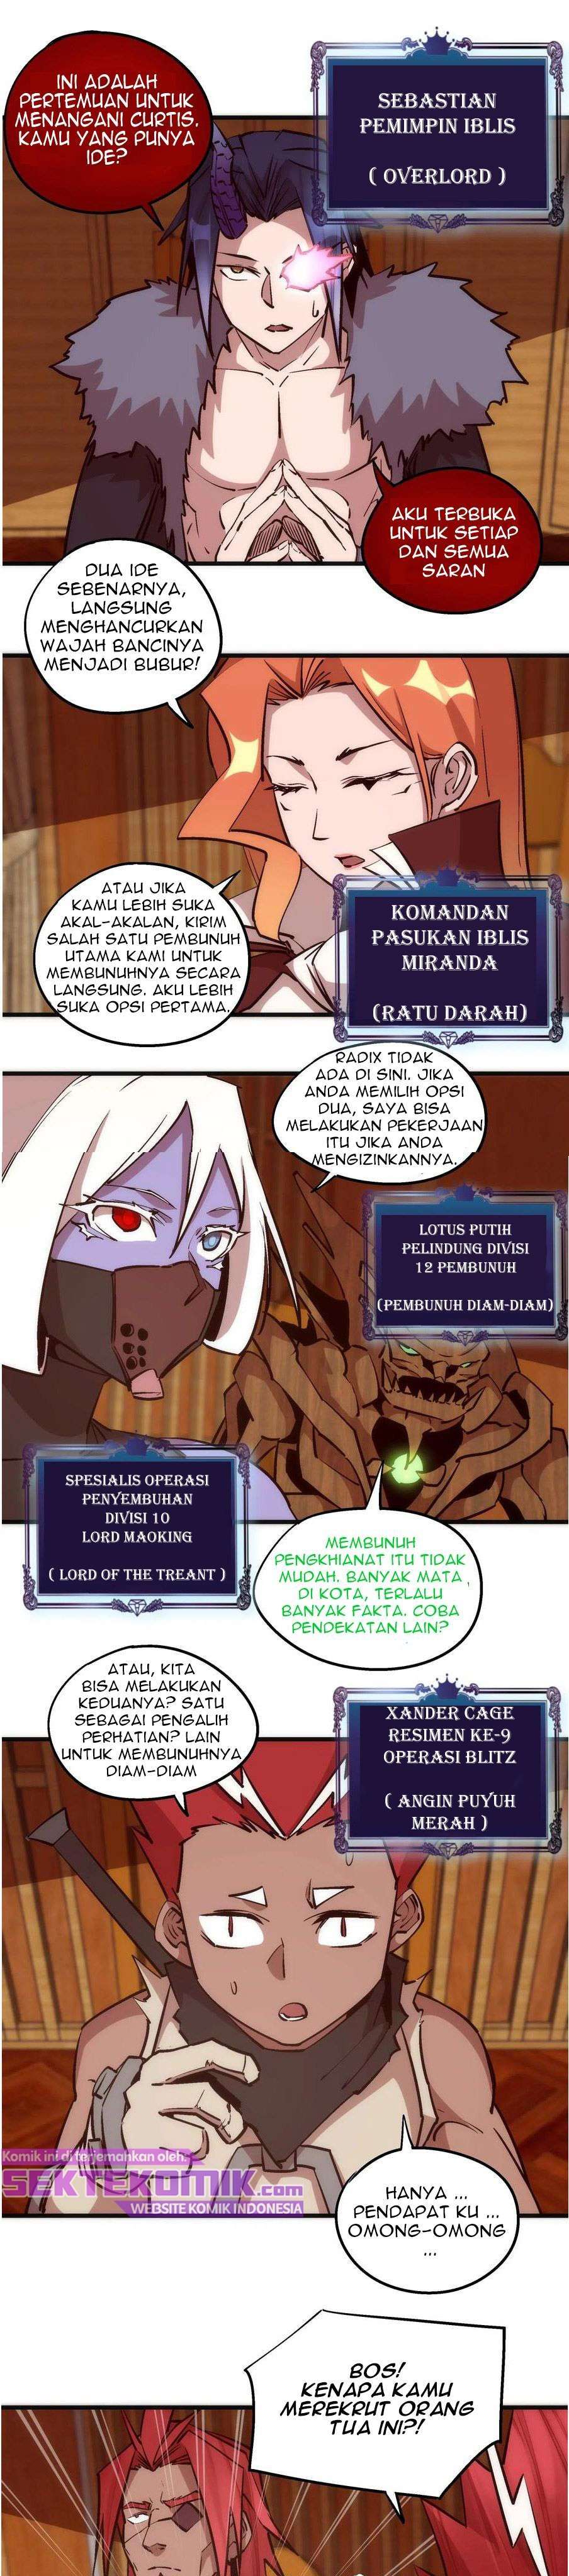 I’m Not The Overlord Chapter 47